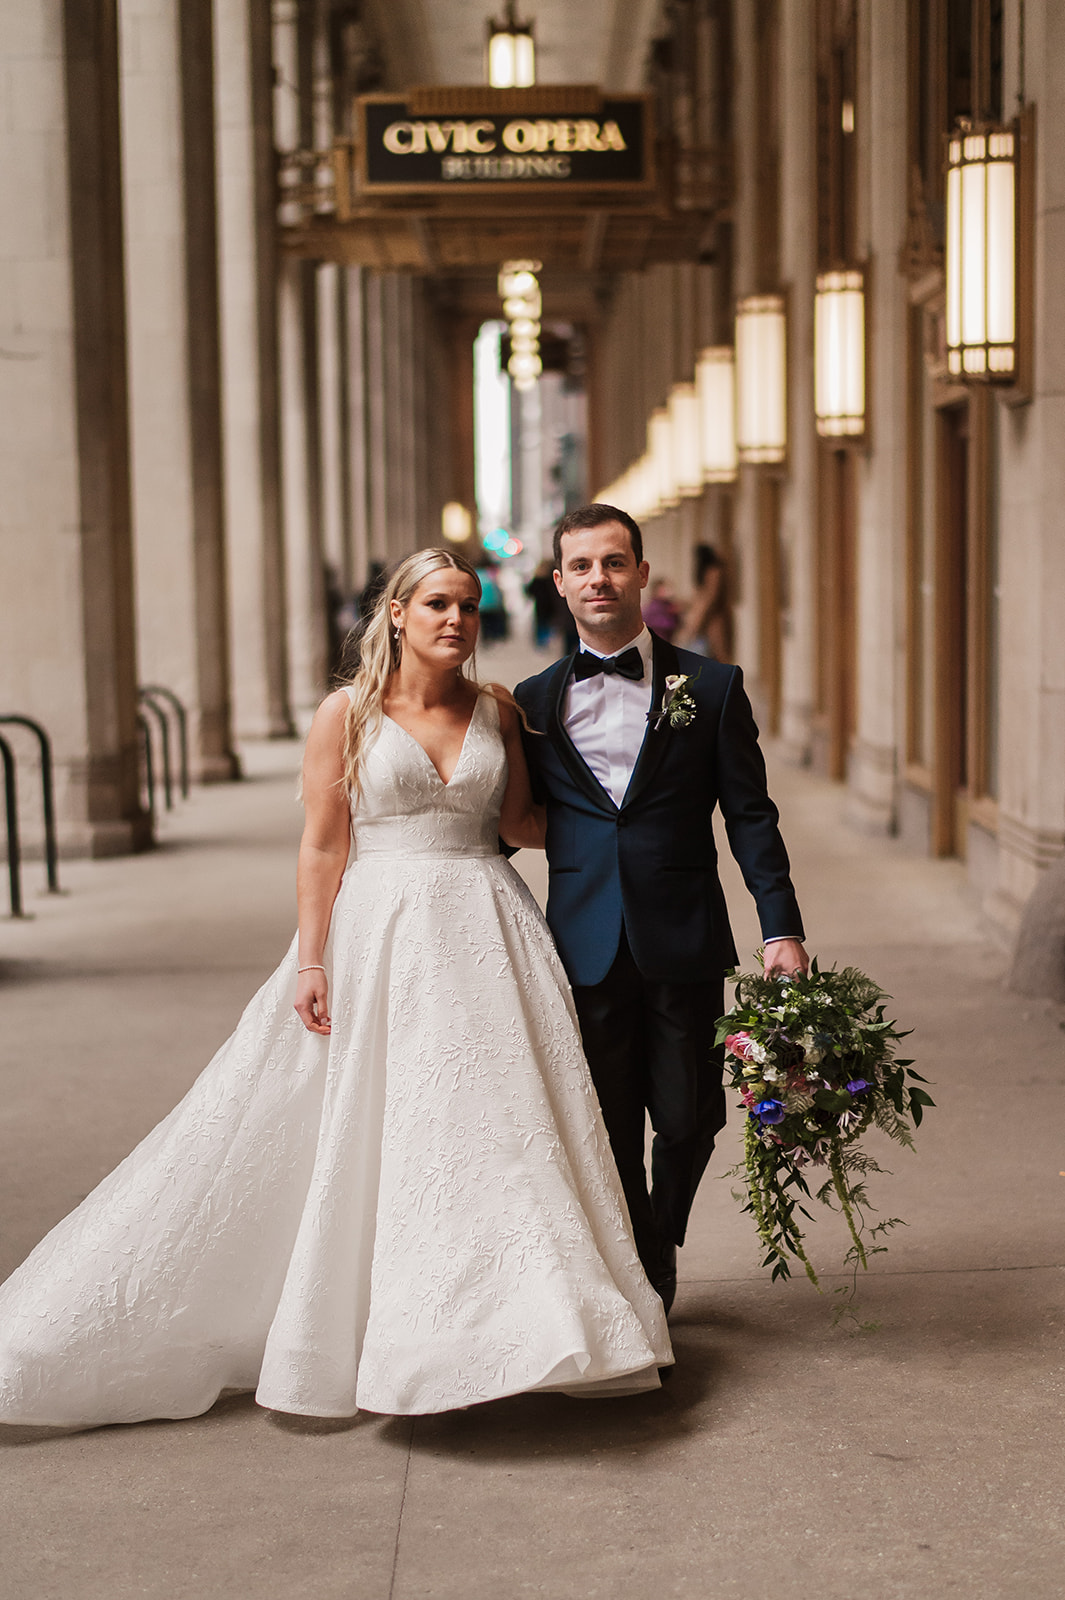 epic bride and groom wedding photos at the Lyric Opera Chicago.